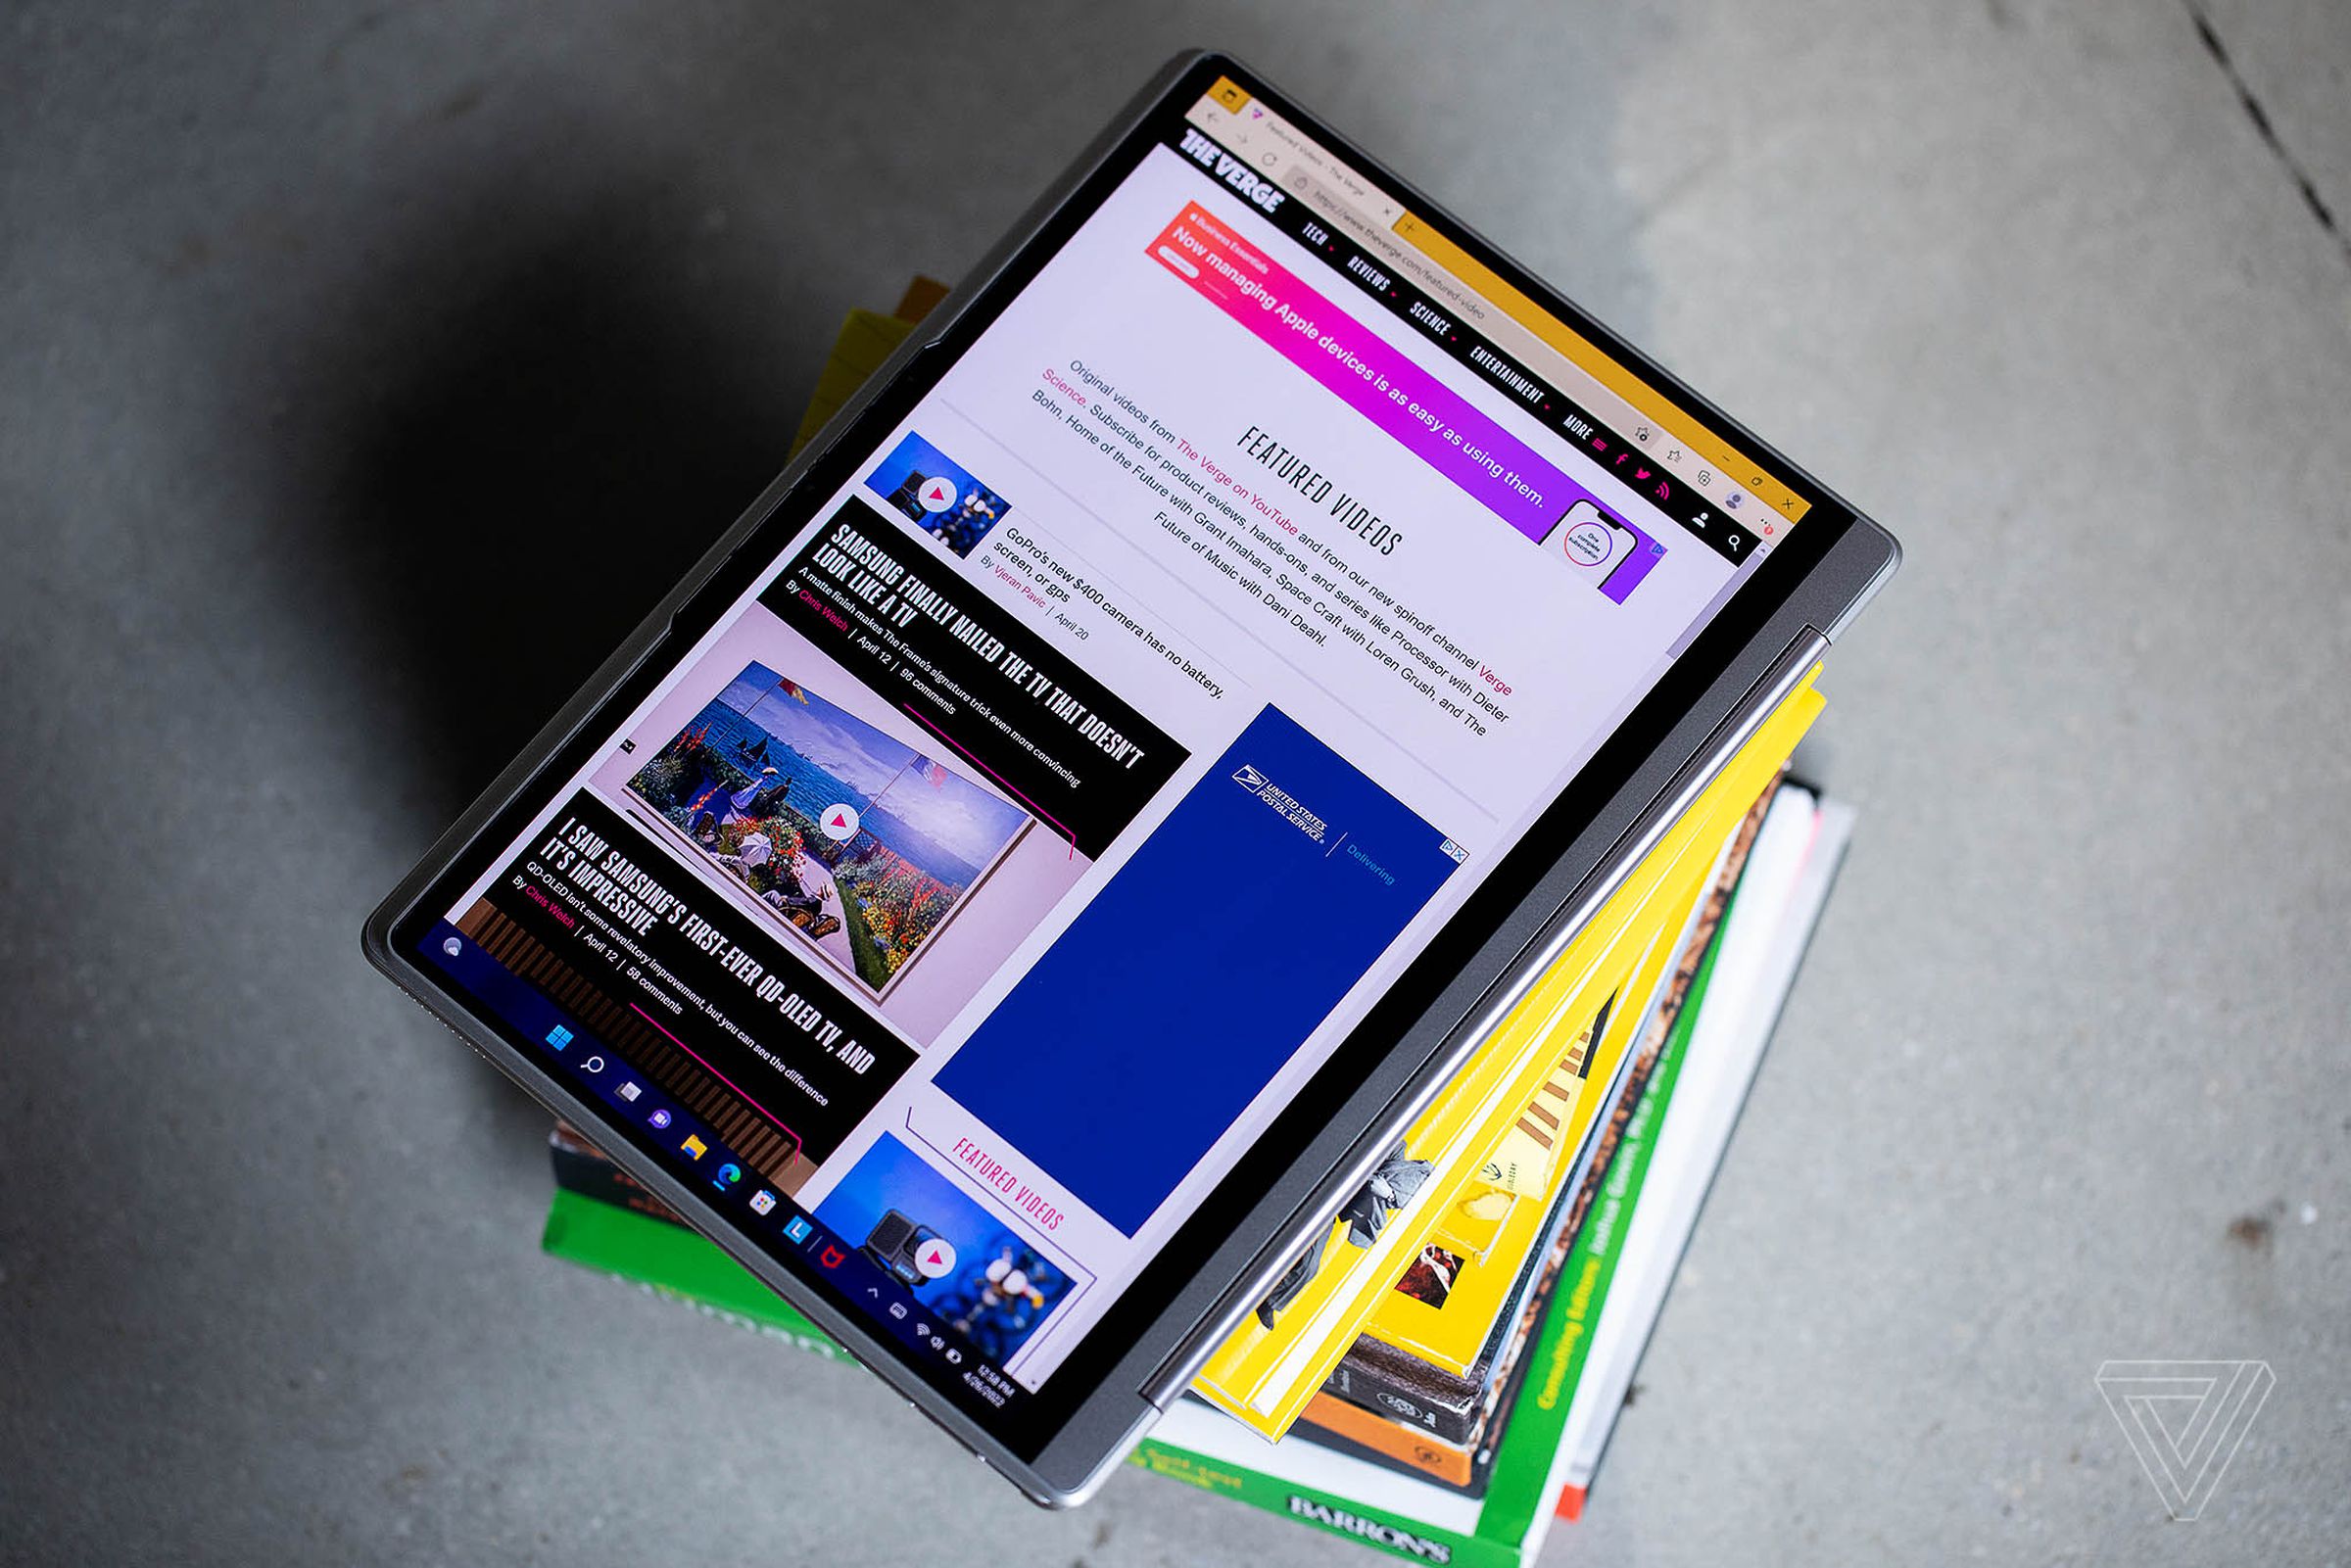 The Lenovo Yoga 9i in tablet mode on top of a stack of books.